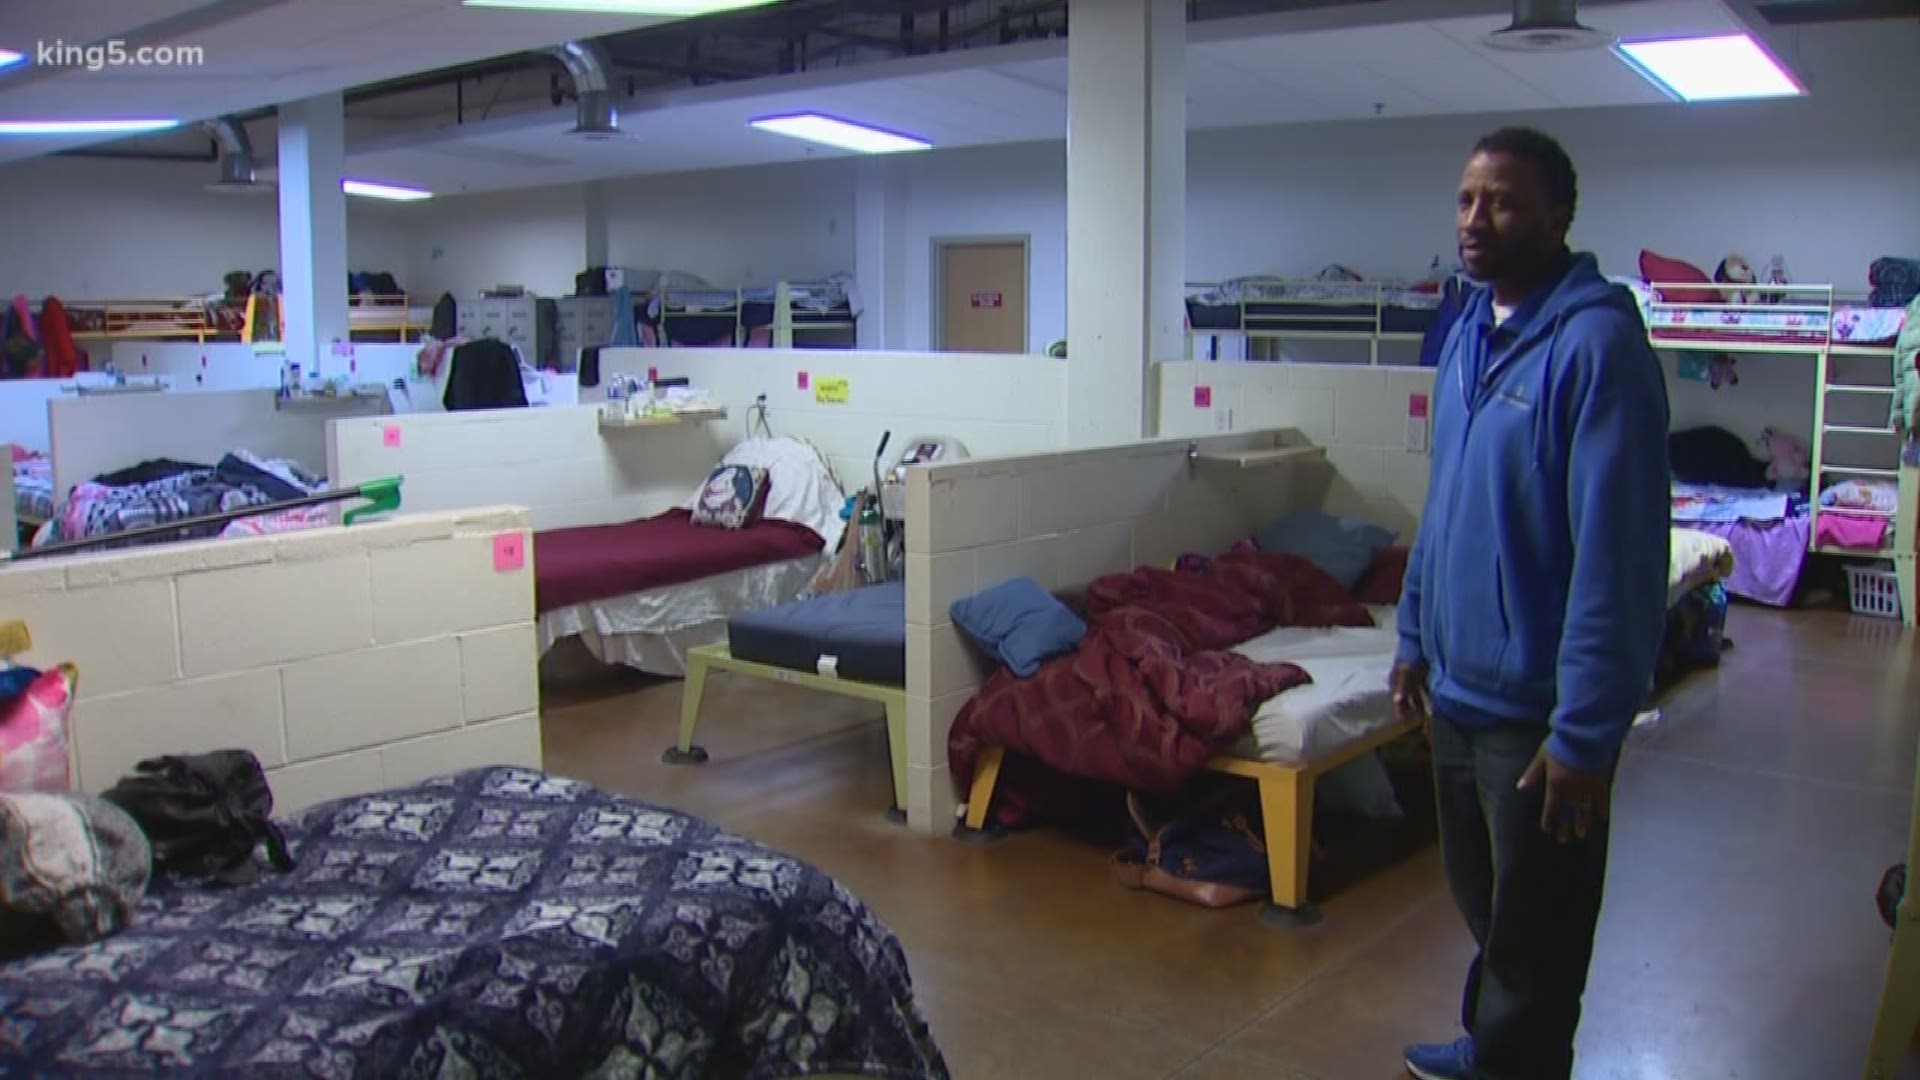 Shelters say they won't turn anyone away, but the number of beds is limited.